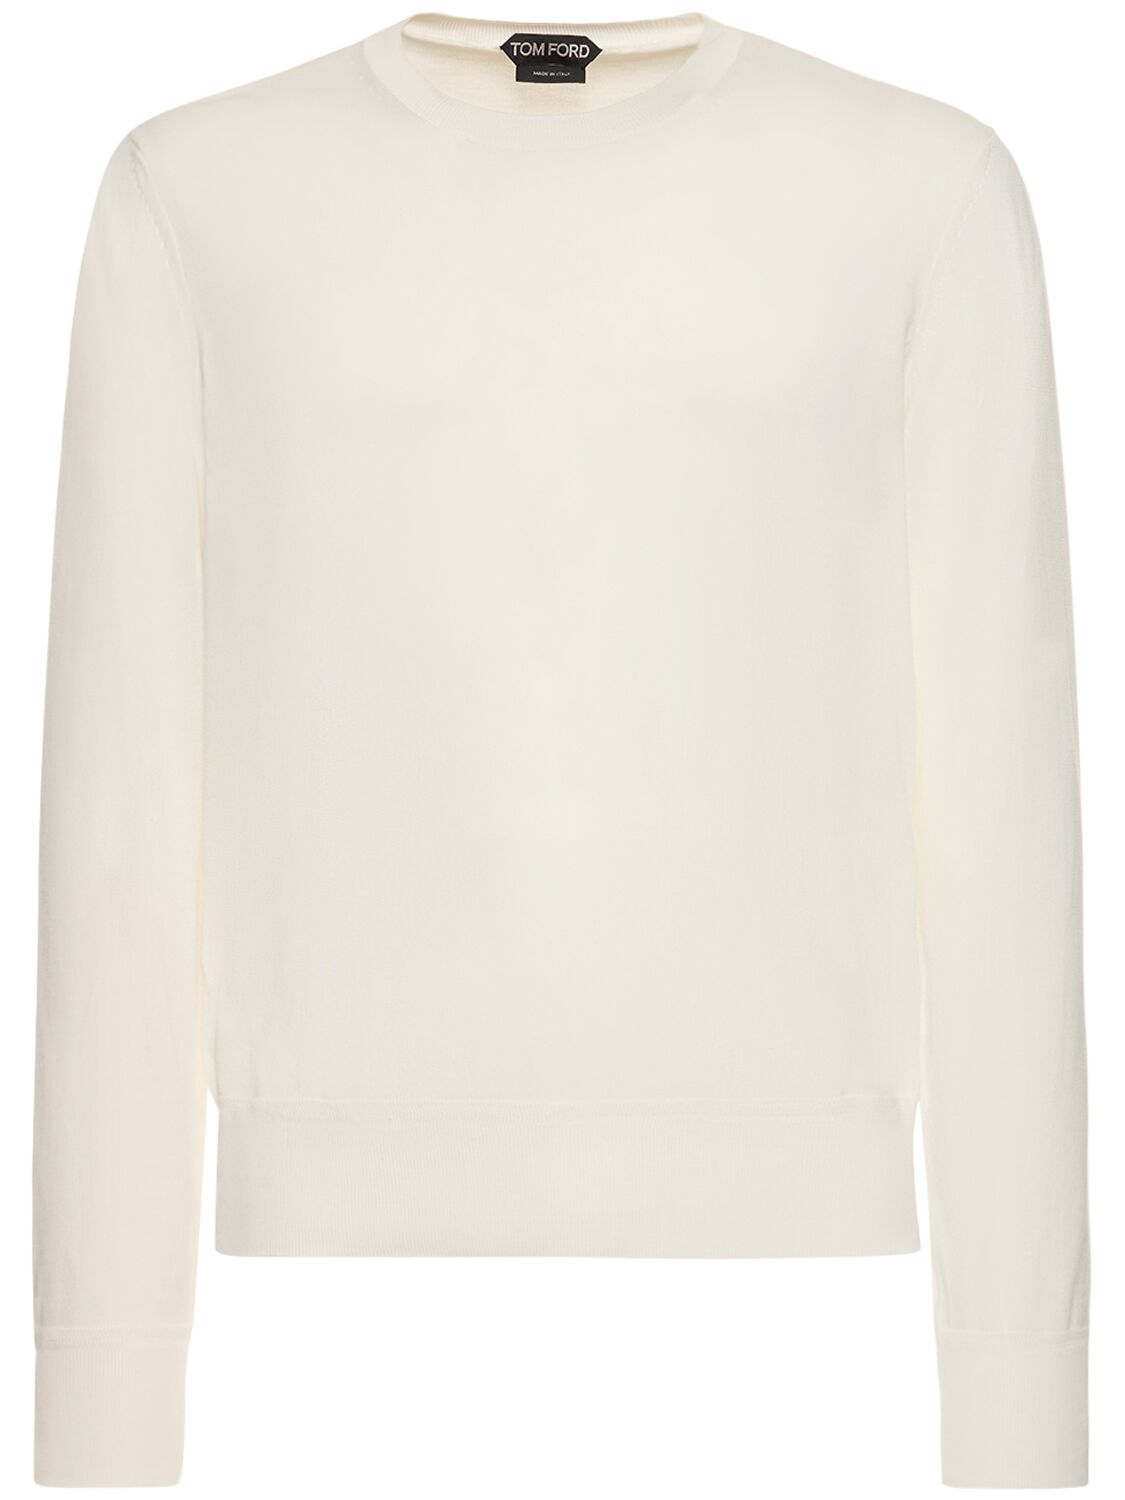 Tom Ford Crewneck Wool Blend Knit Sweater In White